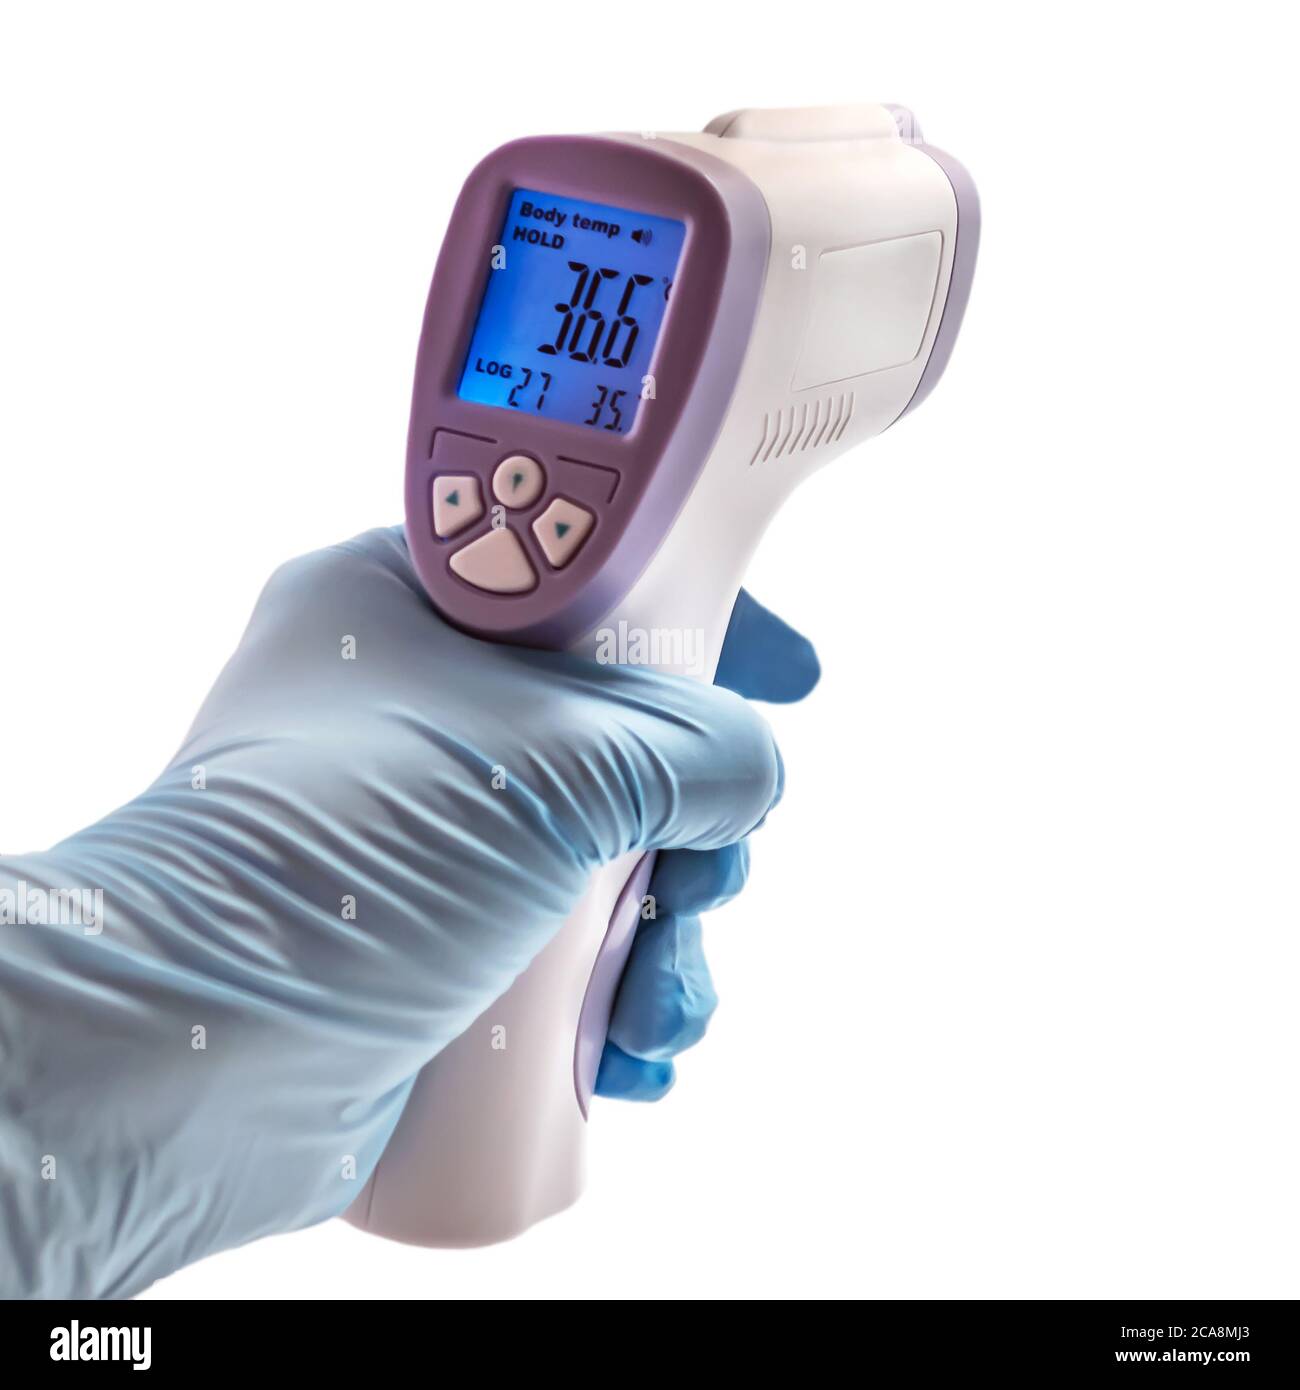 https://c8.alamy.com/comp/2CA8MJ3/thermometer-gun-isometric-medical-digital-non-contact-infrared-sight-handheld-forehead-readings-temperature-measurement-device-isolated-on-white-back-2CA8MJ3.jpg